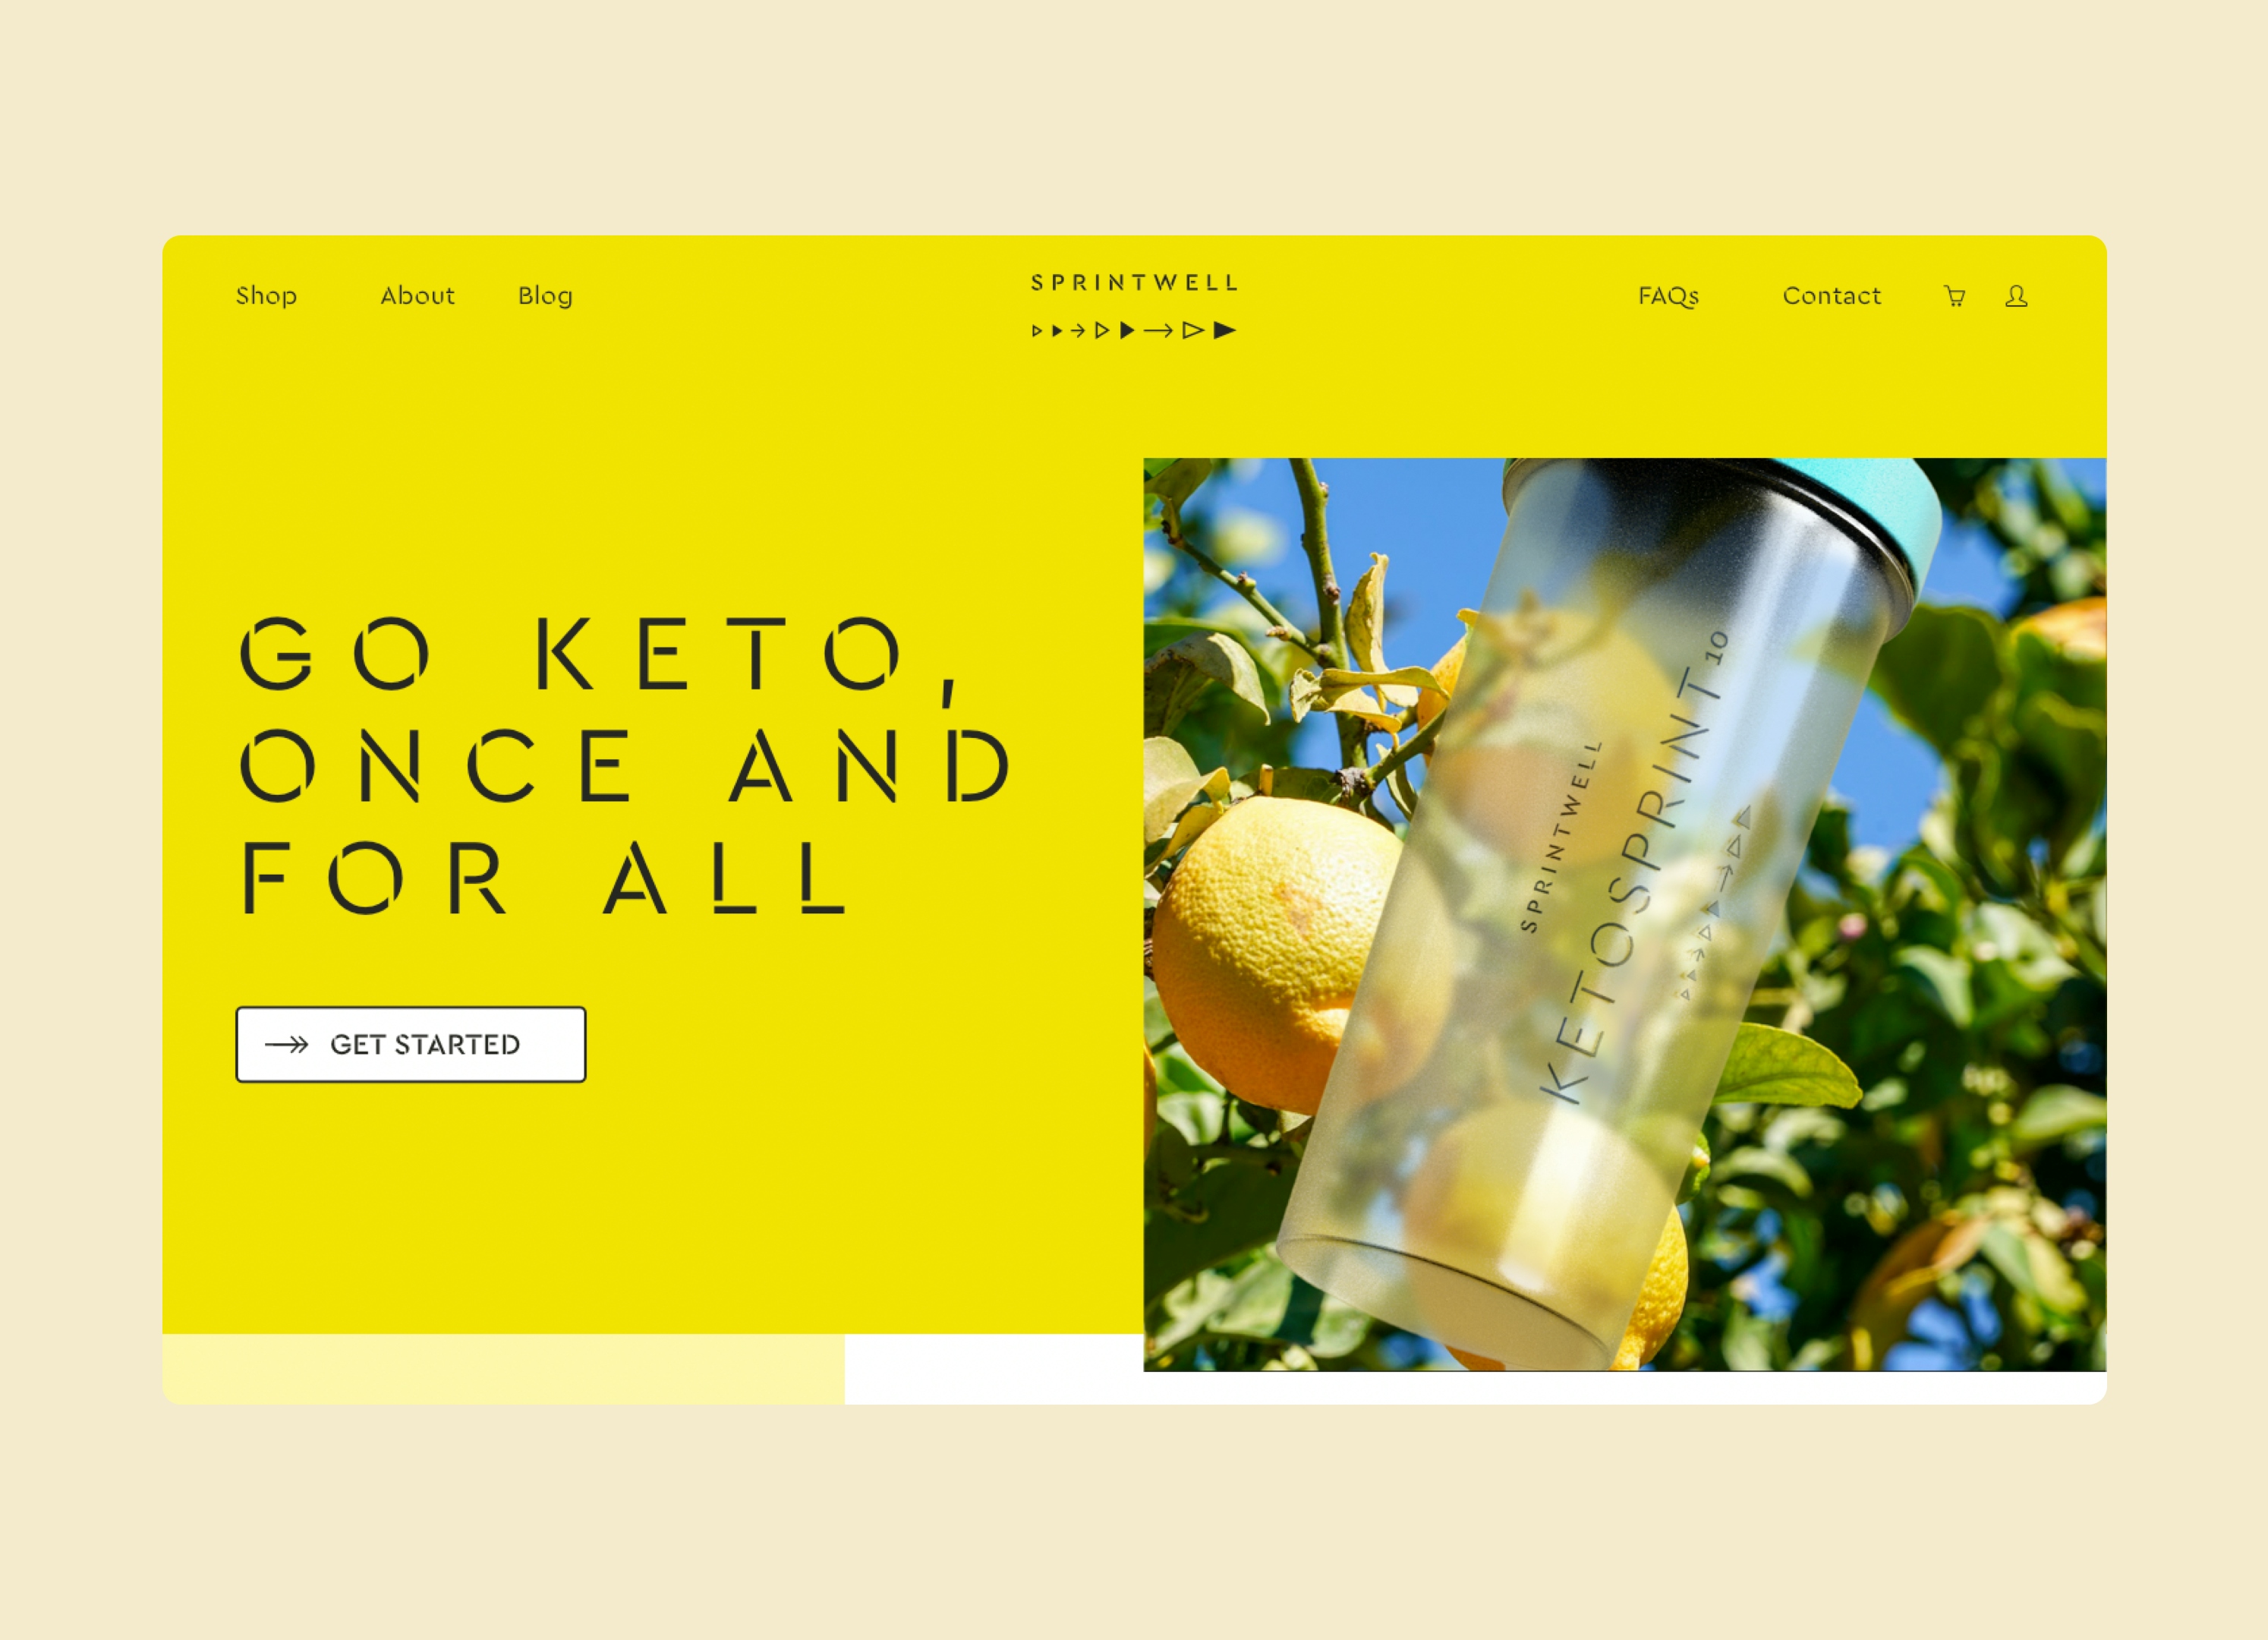 A yellow landscape web page sits on a peach-beige background. To the left is text “Go Keto, once and for all” with a white call-to-action “Get started” To the right is a picture of a Sprintwell Ketosprint Keto protein shaker in front of a lemon tree.